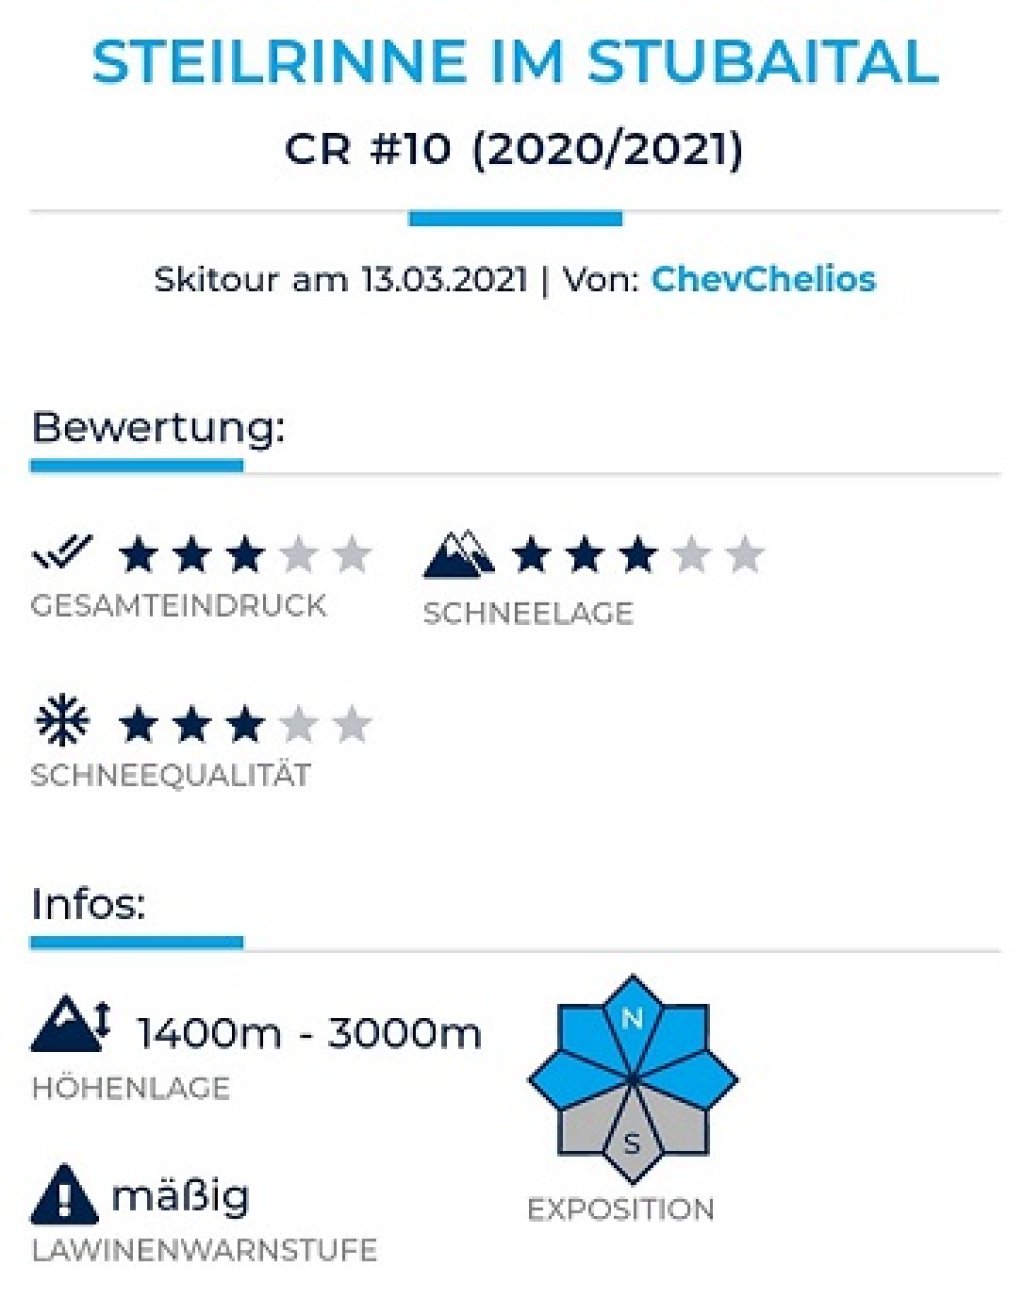 In the overview box: Information on the rating, altitude, exposure and avalanche warning level clearly summarized.